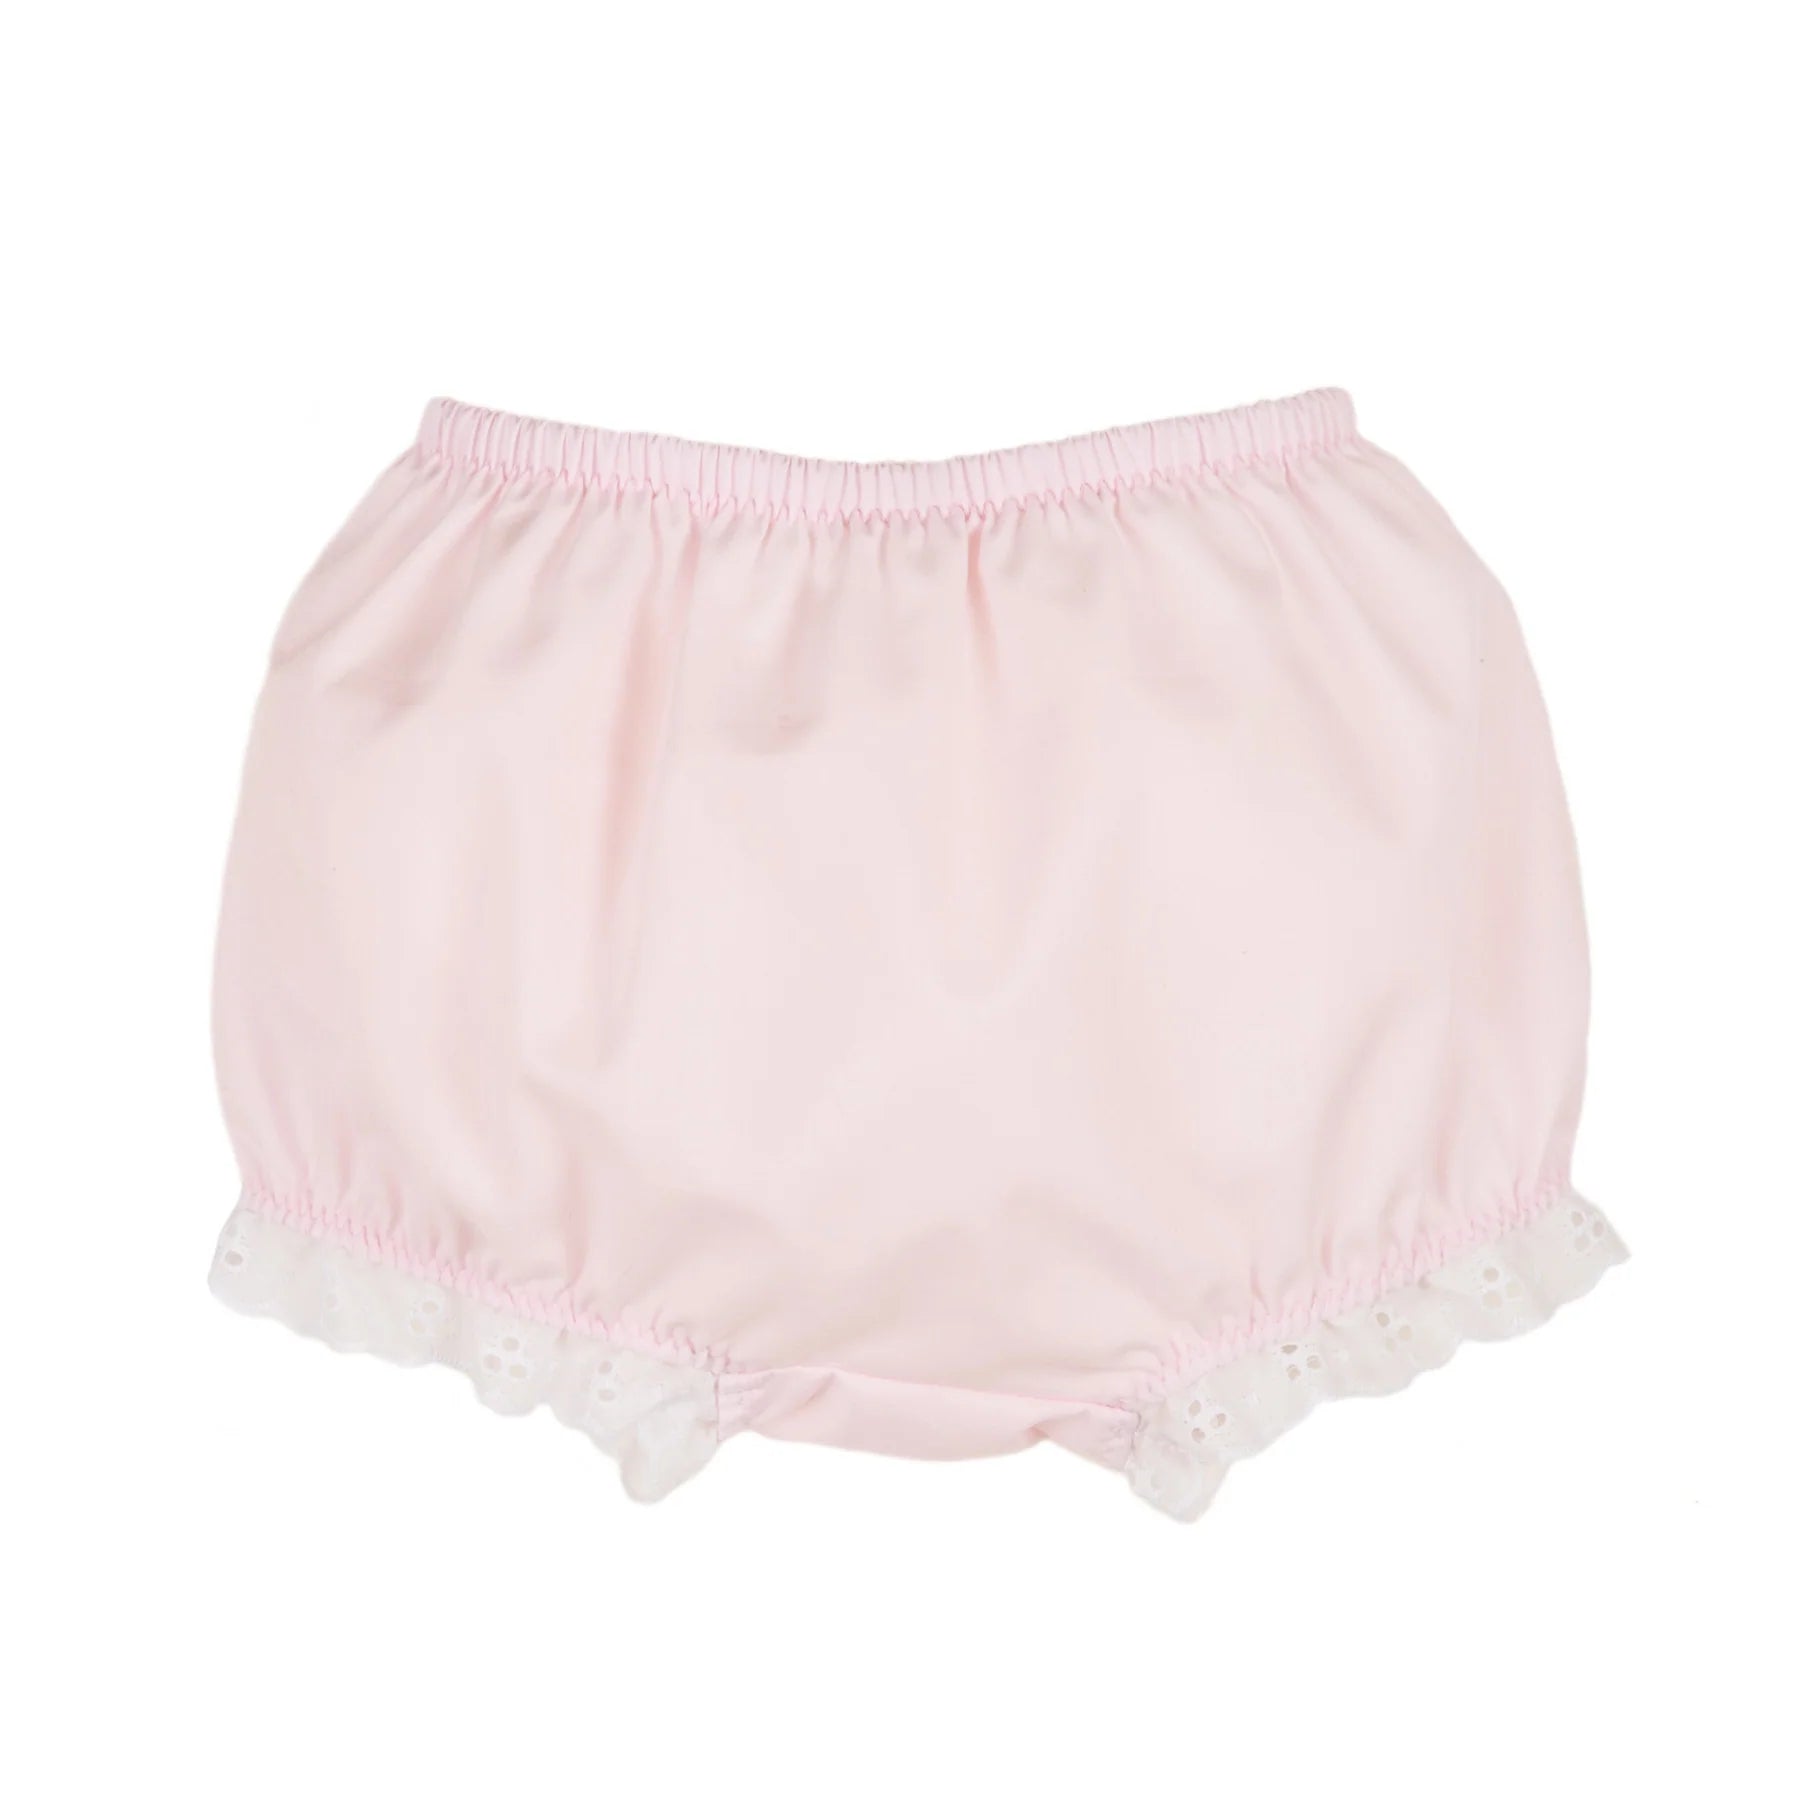 TBBC Belle's Bloomer Broadcloth Palm Beach Pink